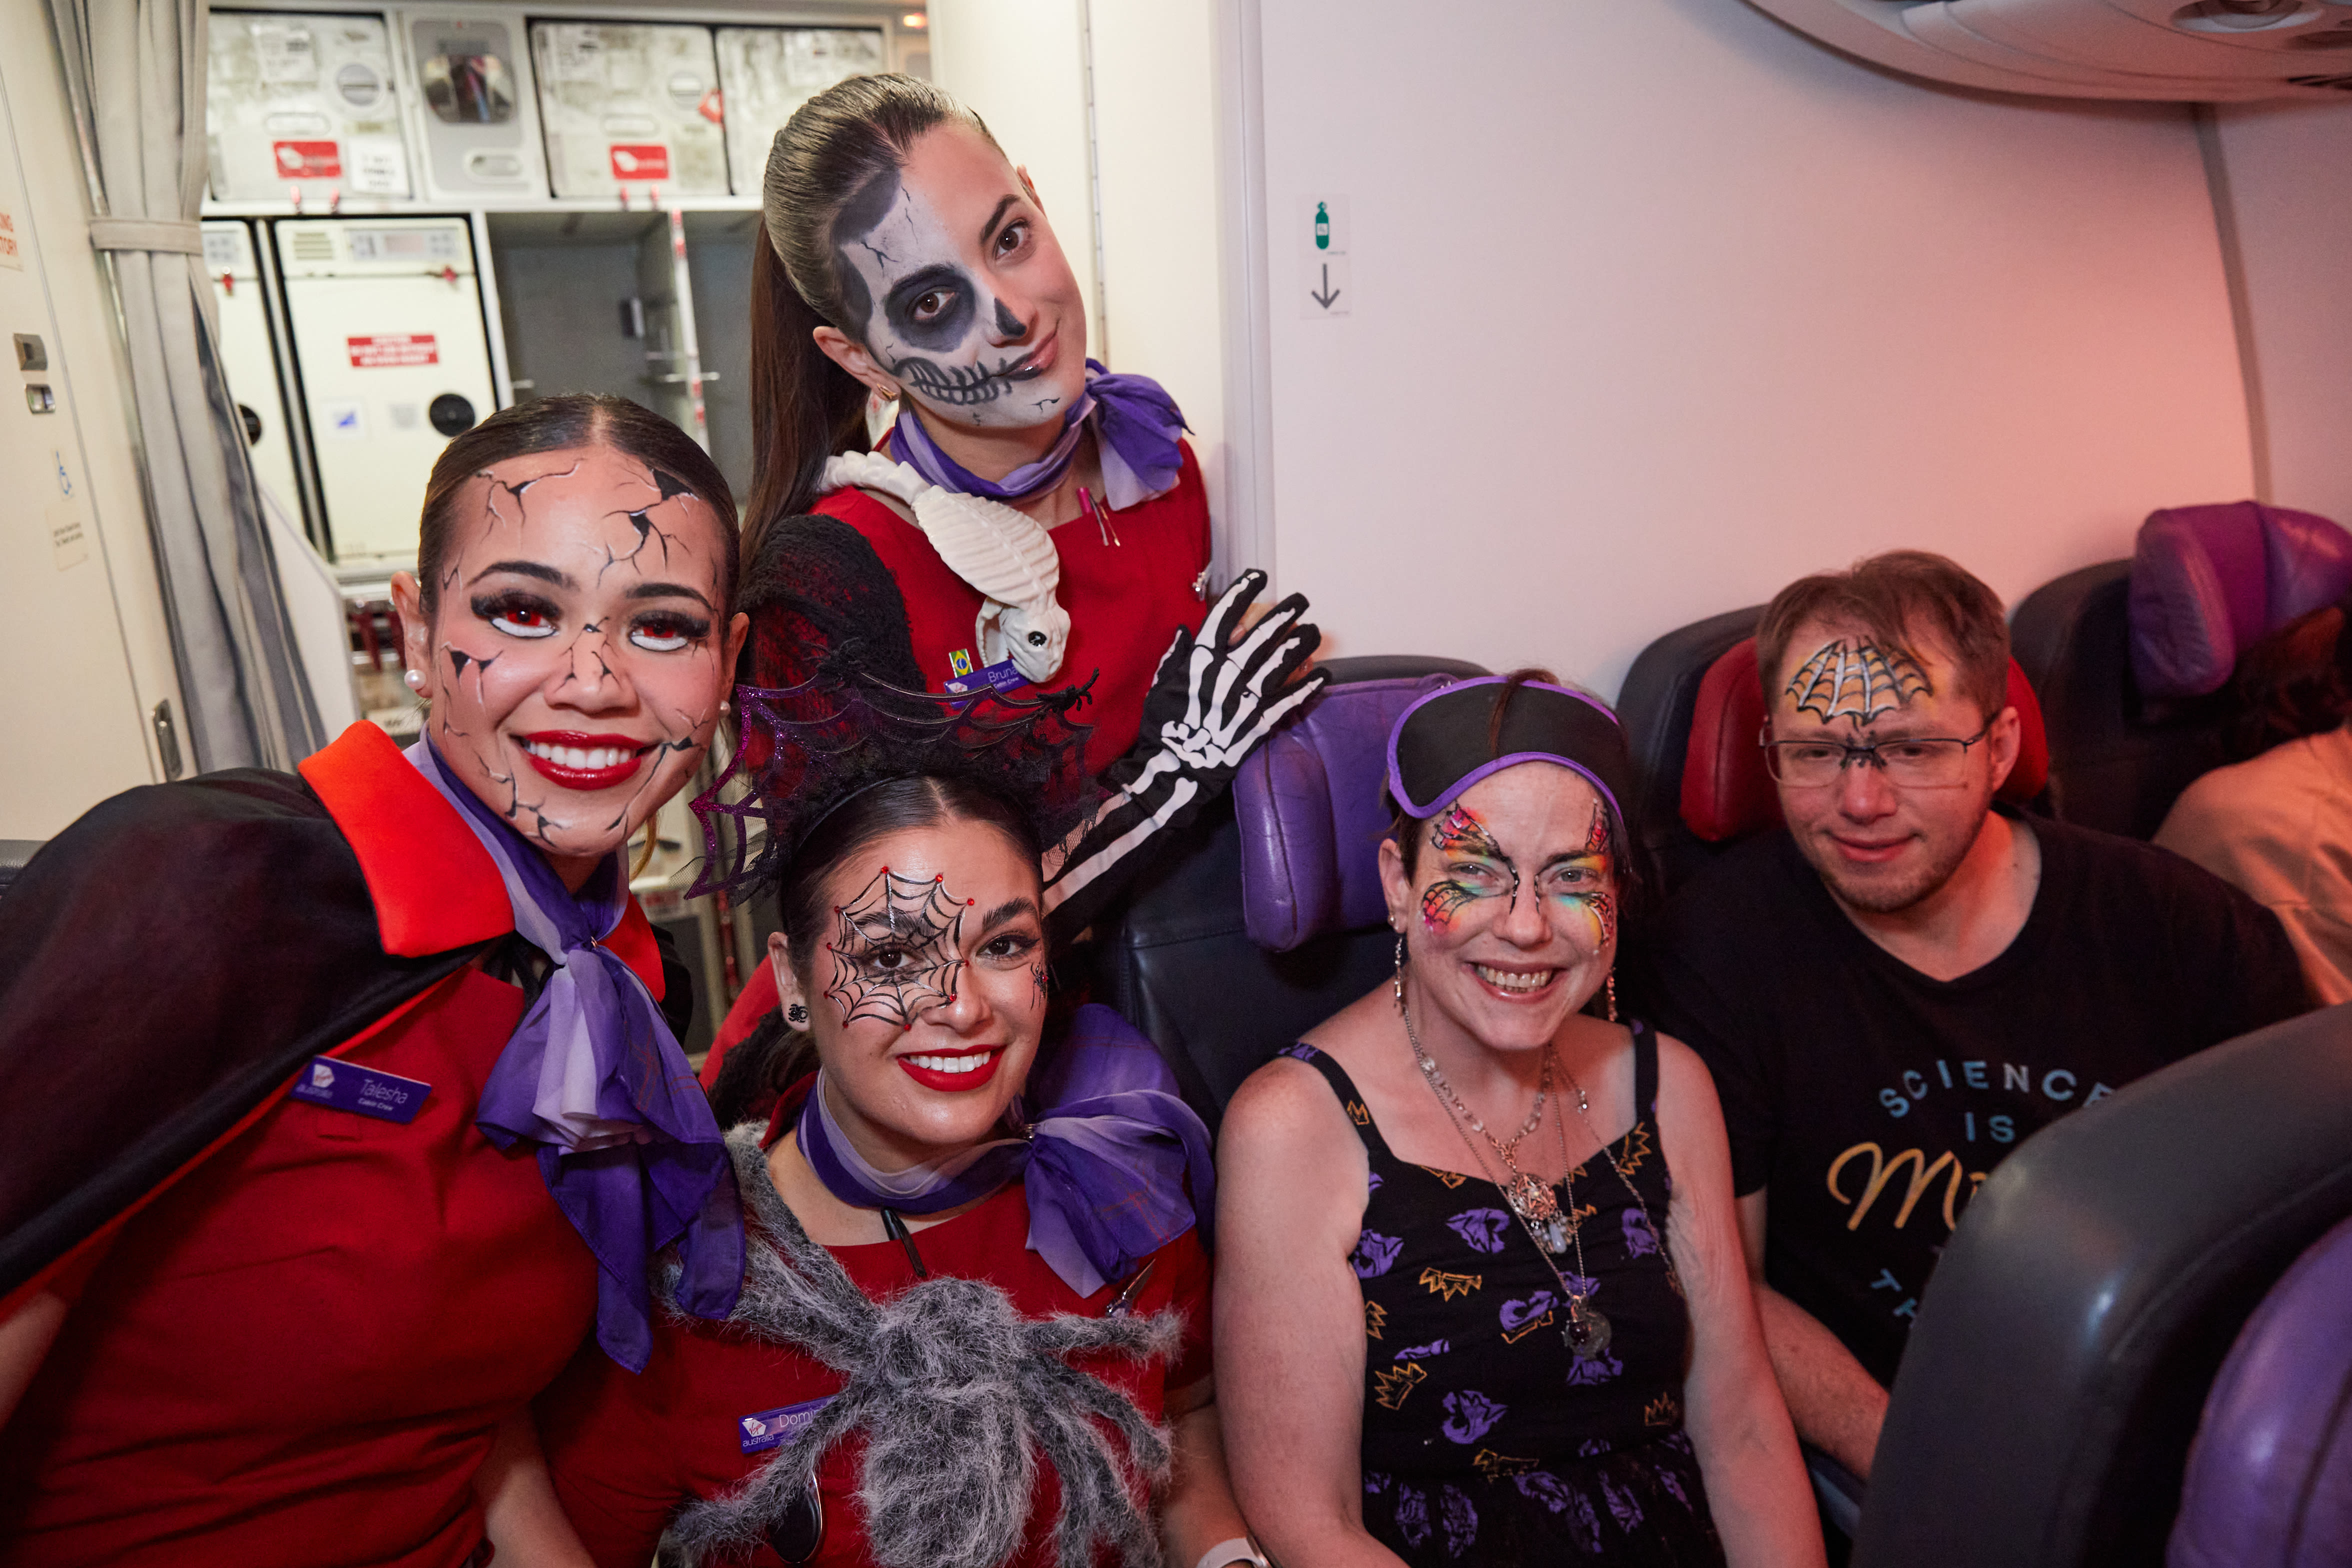 Three Virgin Australia cabin crew with two passengers, all in Halloween fancy dress costumes